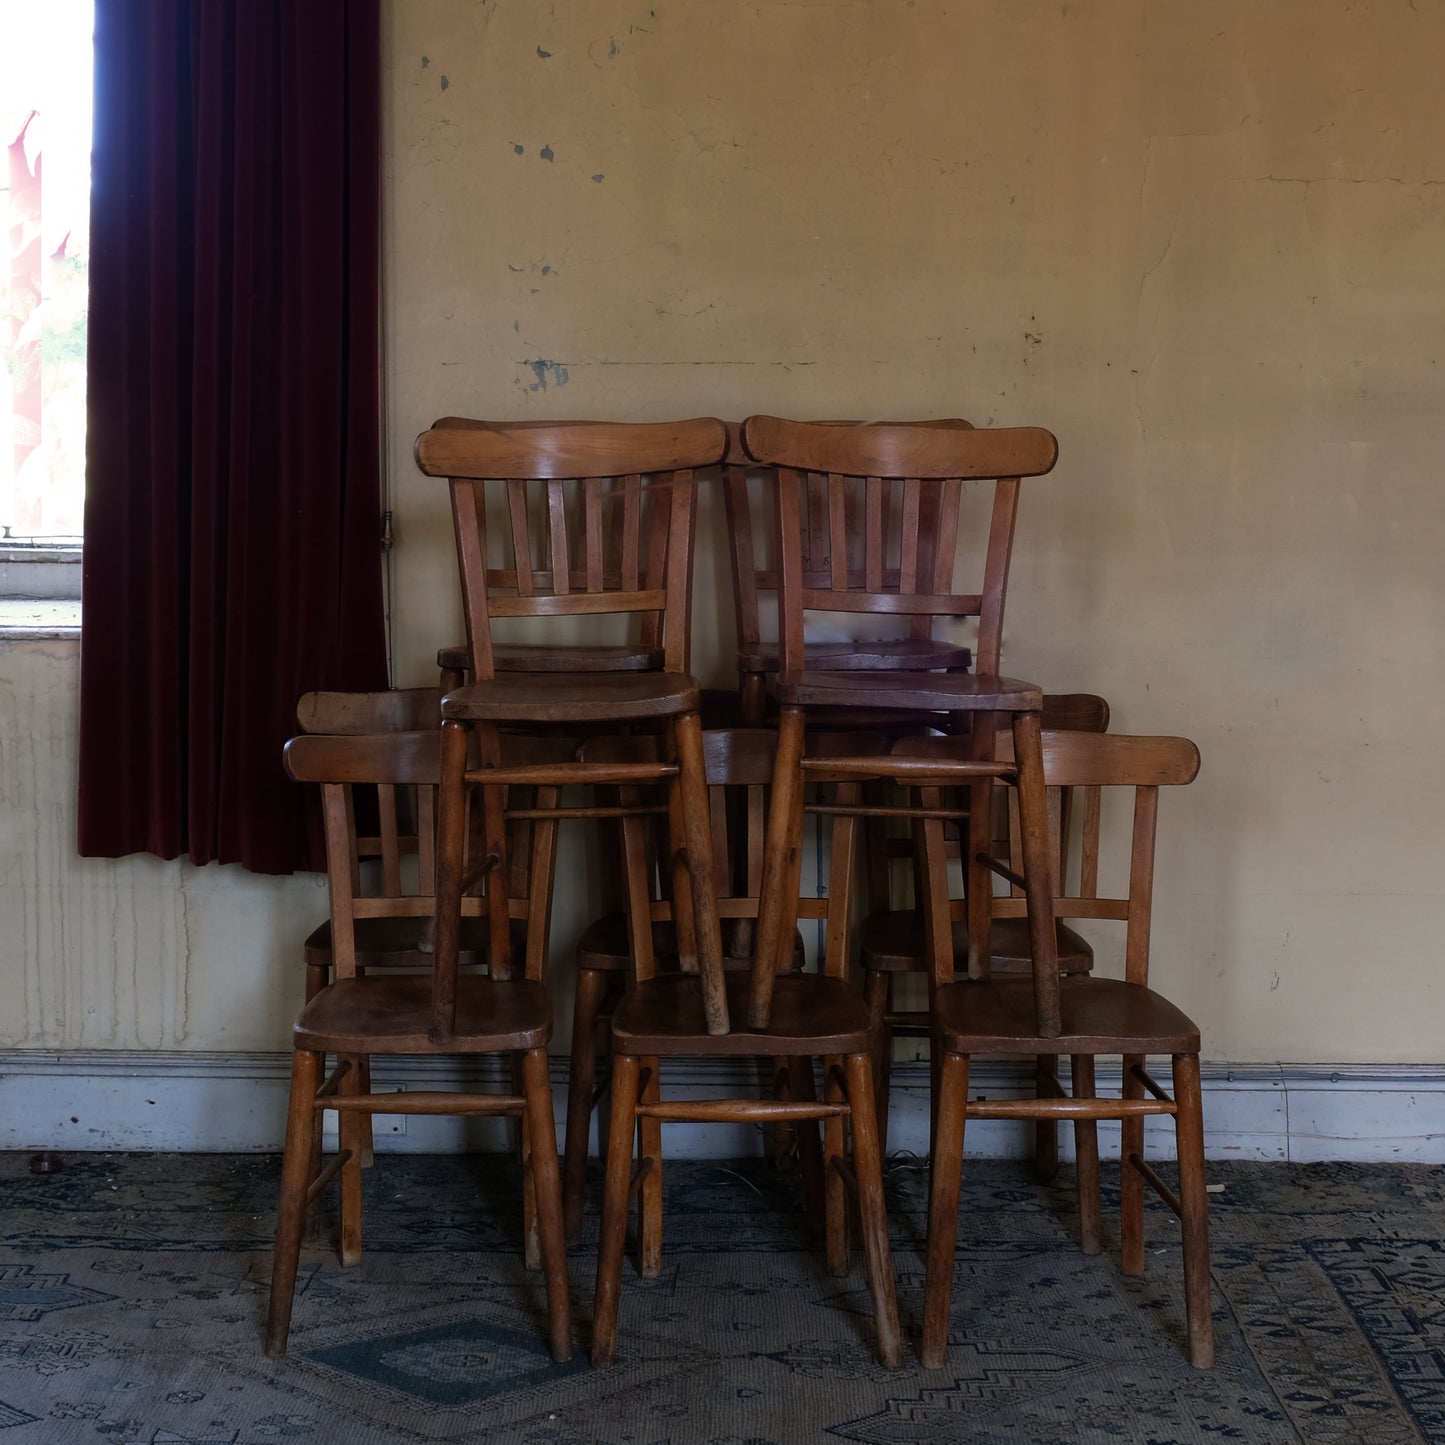 Elm and beech school chairs